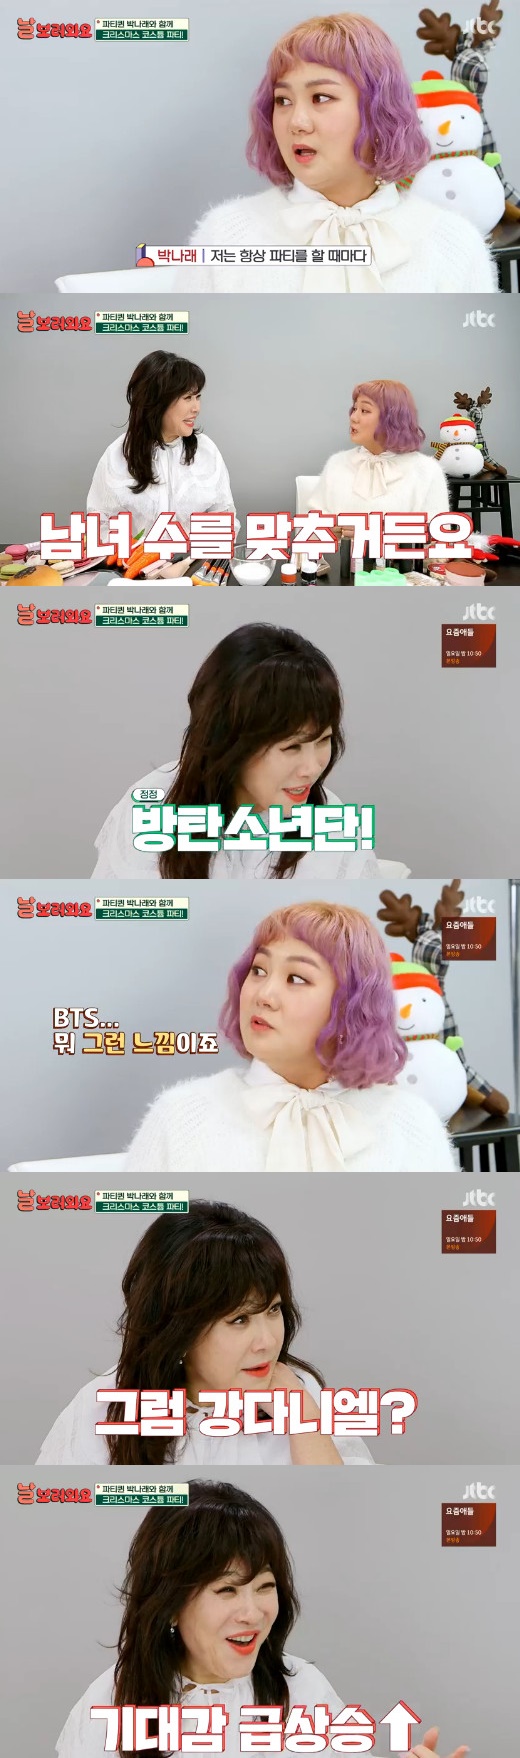 Noh Sa-yeon mentioned BTS and Wanna One Kang Daniel as the first members of the Christmas Party.On the comprehensive programming channel JTBC Come to the Day - The Self-Broadcasting Producer (hereinafter referred to as Come to the Day), Noh Sa-yeon prepared the Krismati Costume Party with Park Na-rae.On the day, Noh Sa-yeon joined hands with Park Na-rae for the Christmas costume Party.Noh Sa-yeon asked Park Na-rae, Do you have friends because you are party? and Park Na-rae said, I match the number of men and women every time I do a party.It is a famous Korean Wave star. Park Na-rae added, If you give me a little hint, its Singer. Noh Sa-yeon said, Do you have a bulletproof vest?Yoon Jong-shin was worried that it was a very dangerous statement, and Dindin said, I will comment.Noh Sa-yeon laughed when he said, Please edit it. Park Na-rae explained, It feels like BTS, and Noh Sa-yeon said, Kang Daniel?And then Park Na-rae expressed confidence, saying, Its more than just imagination.